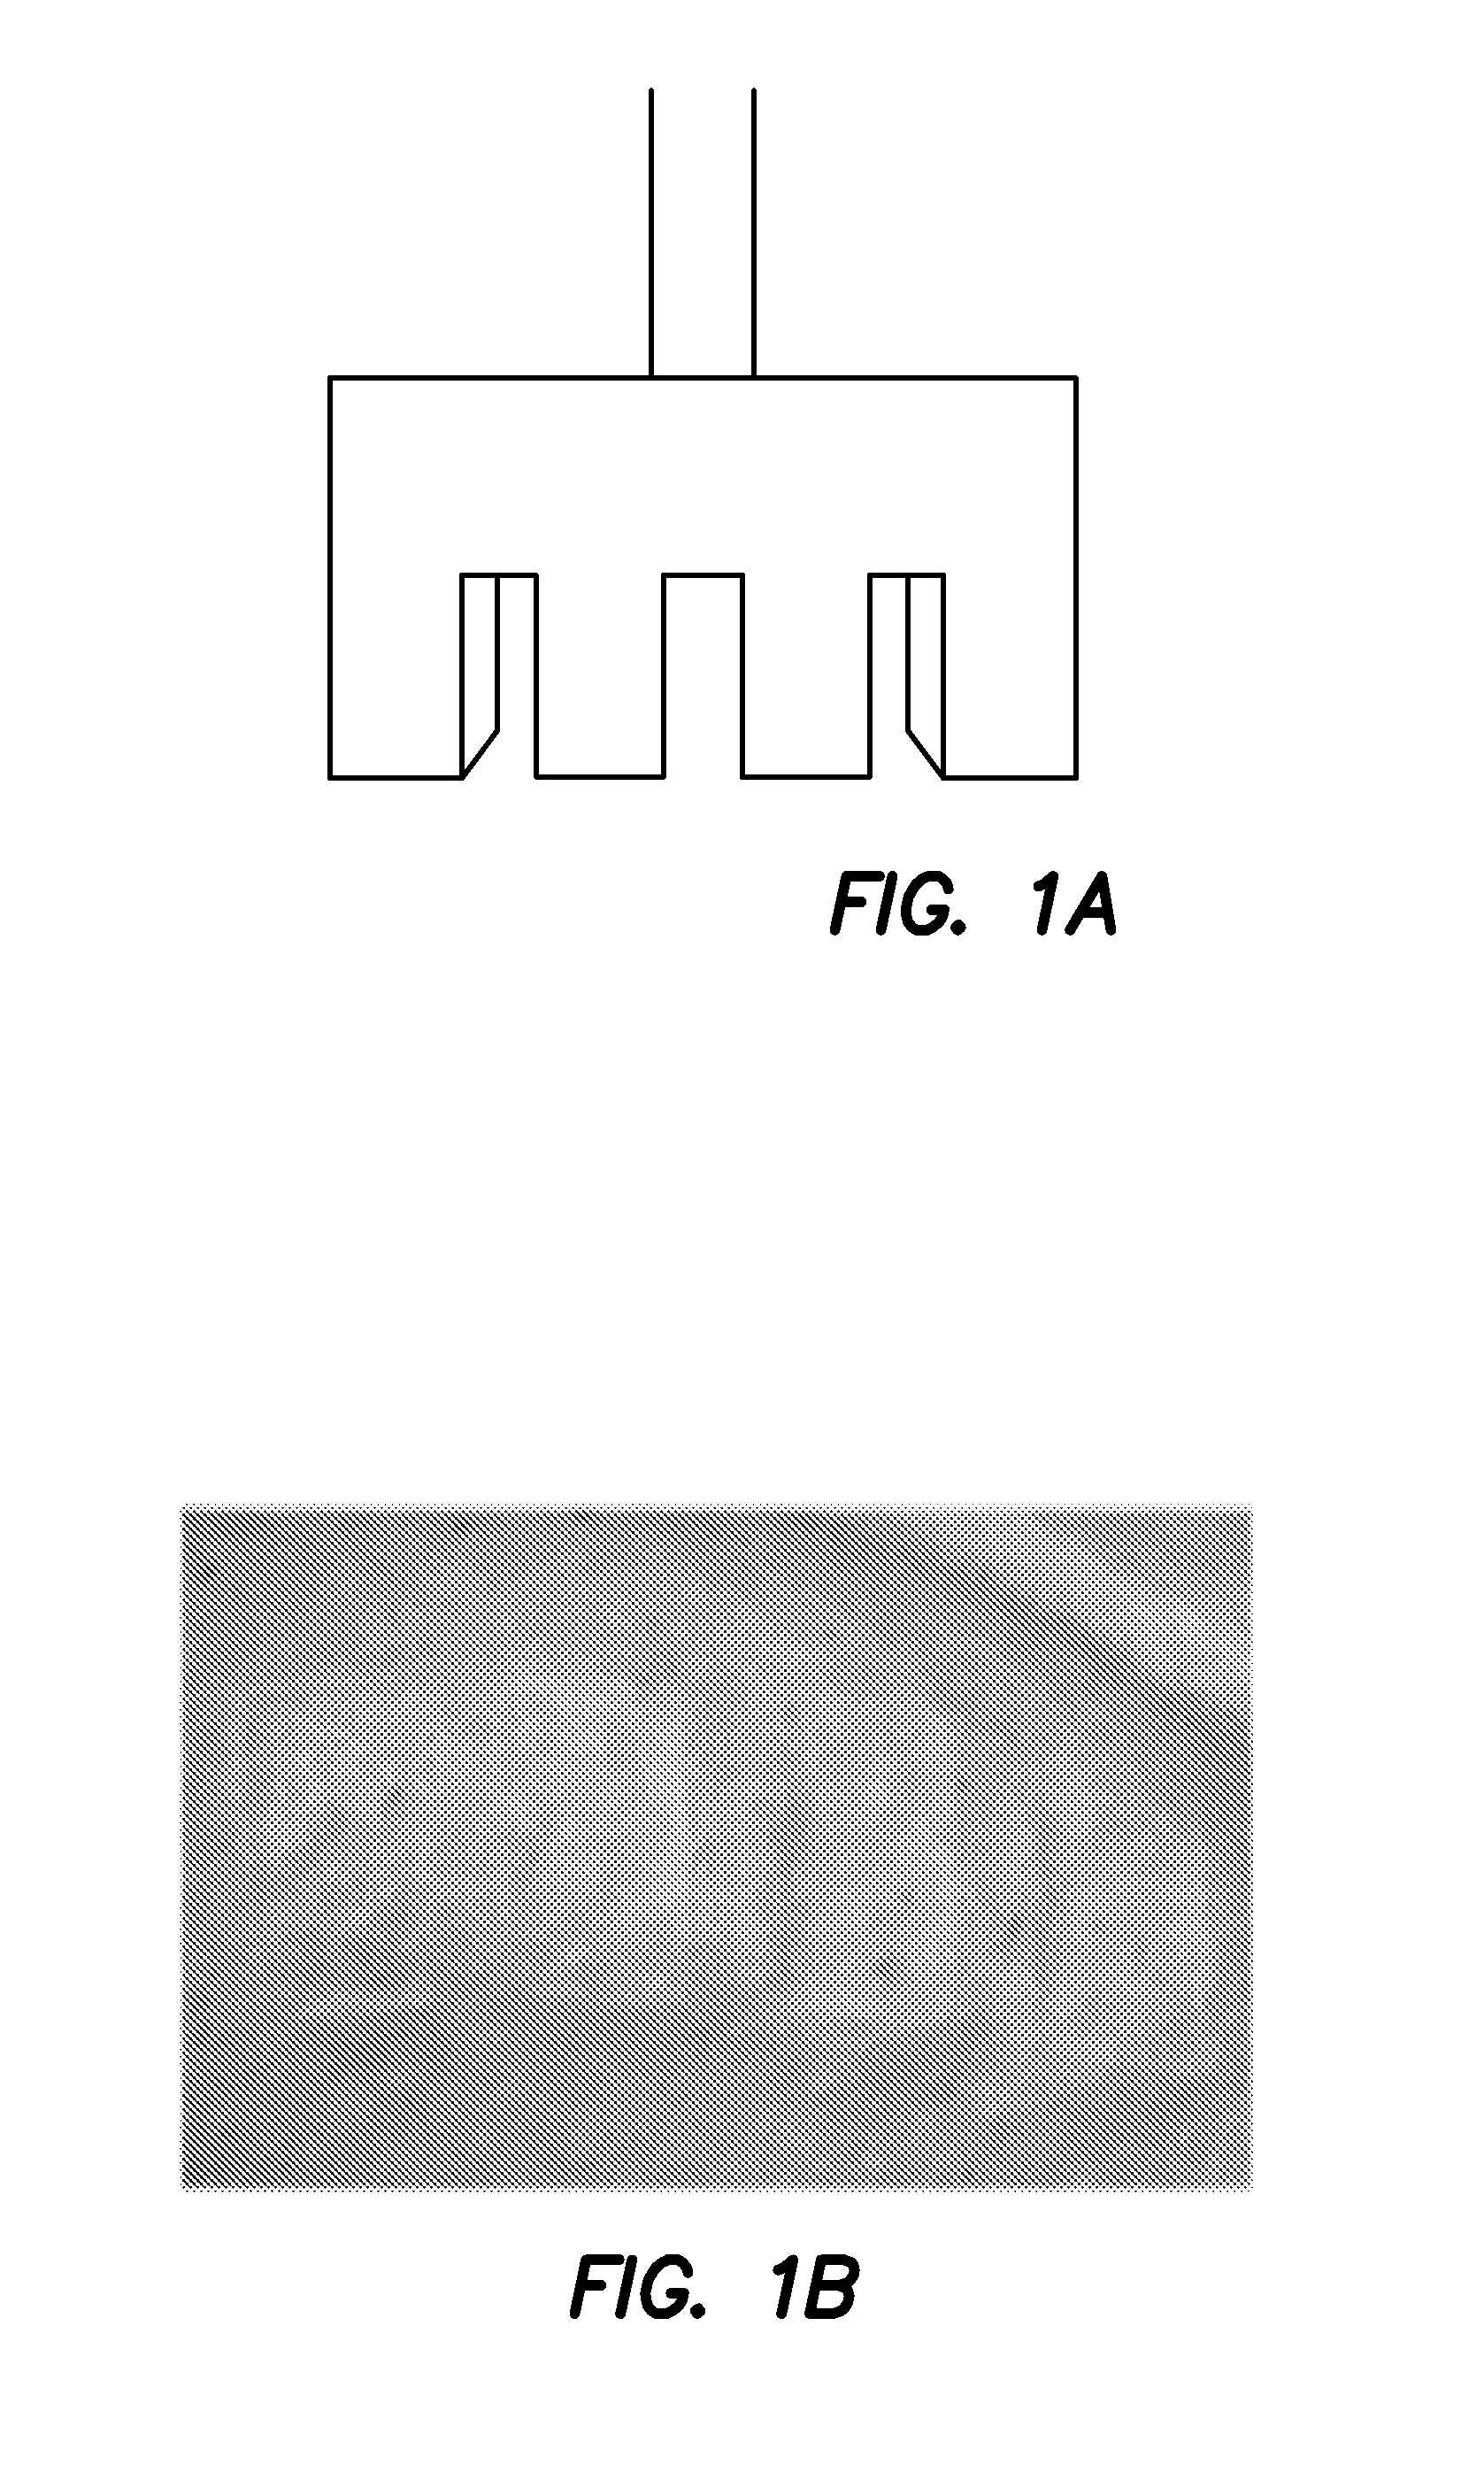 Method and apparatus for performing qualitative and quantitative analysis of burn extent and severity using spatially structured illumination